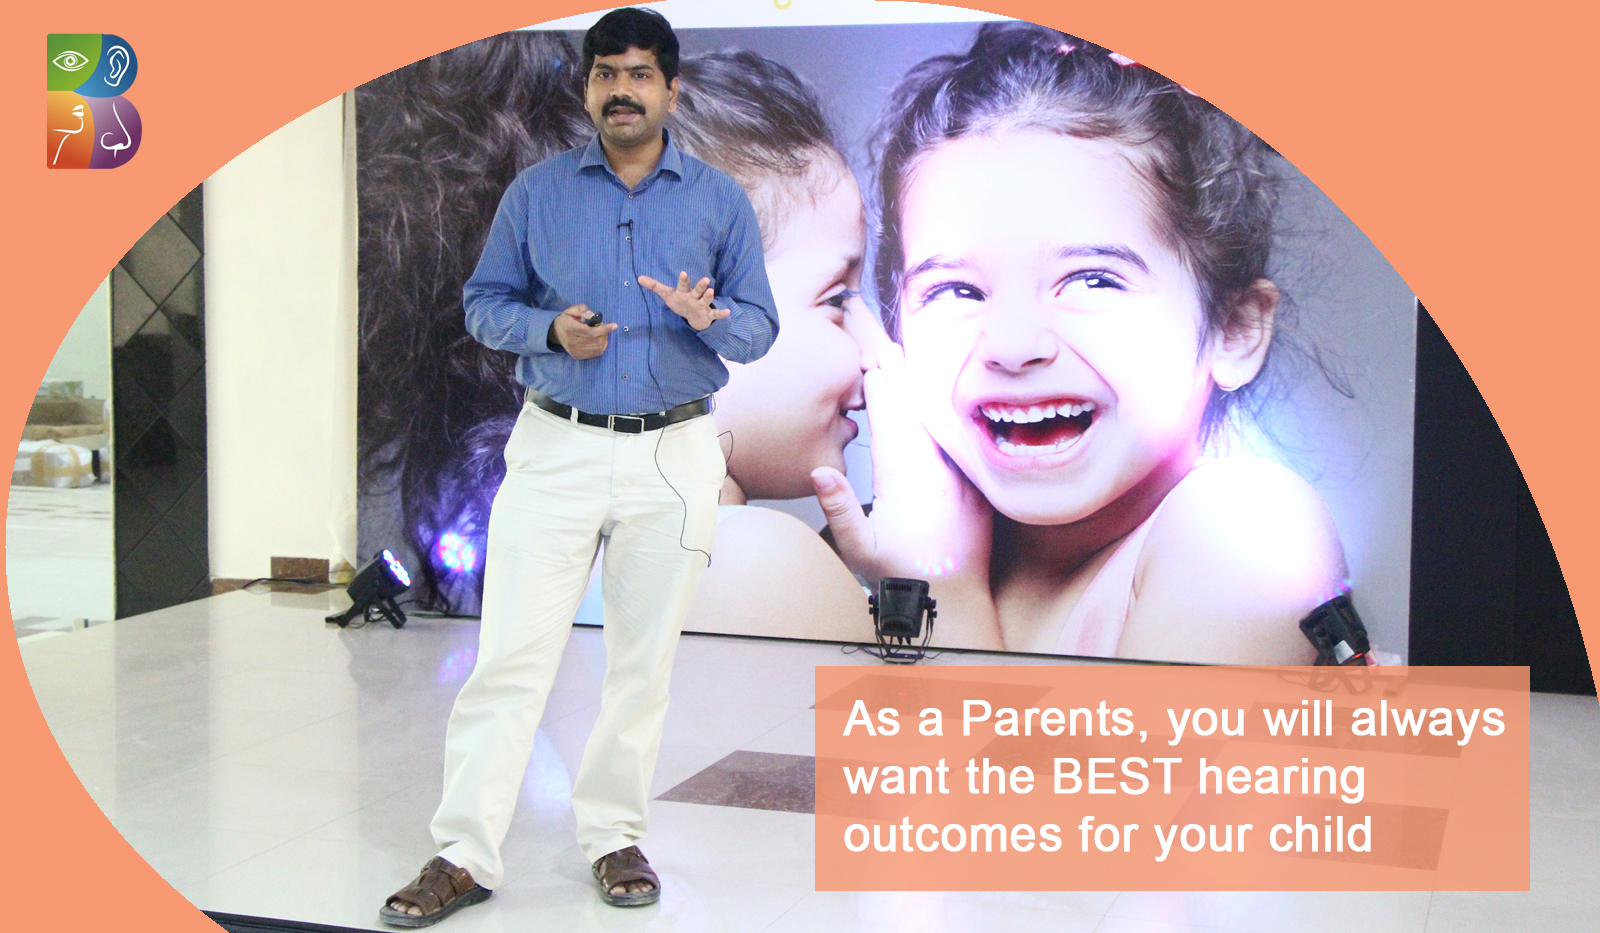 As a Parents, you will always want the BEST hearing outcomes for your child